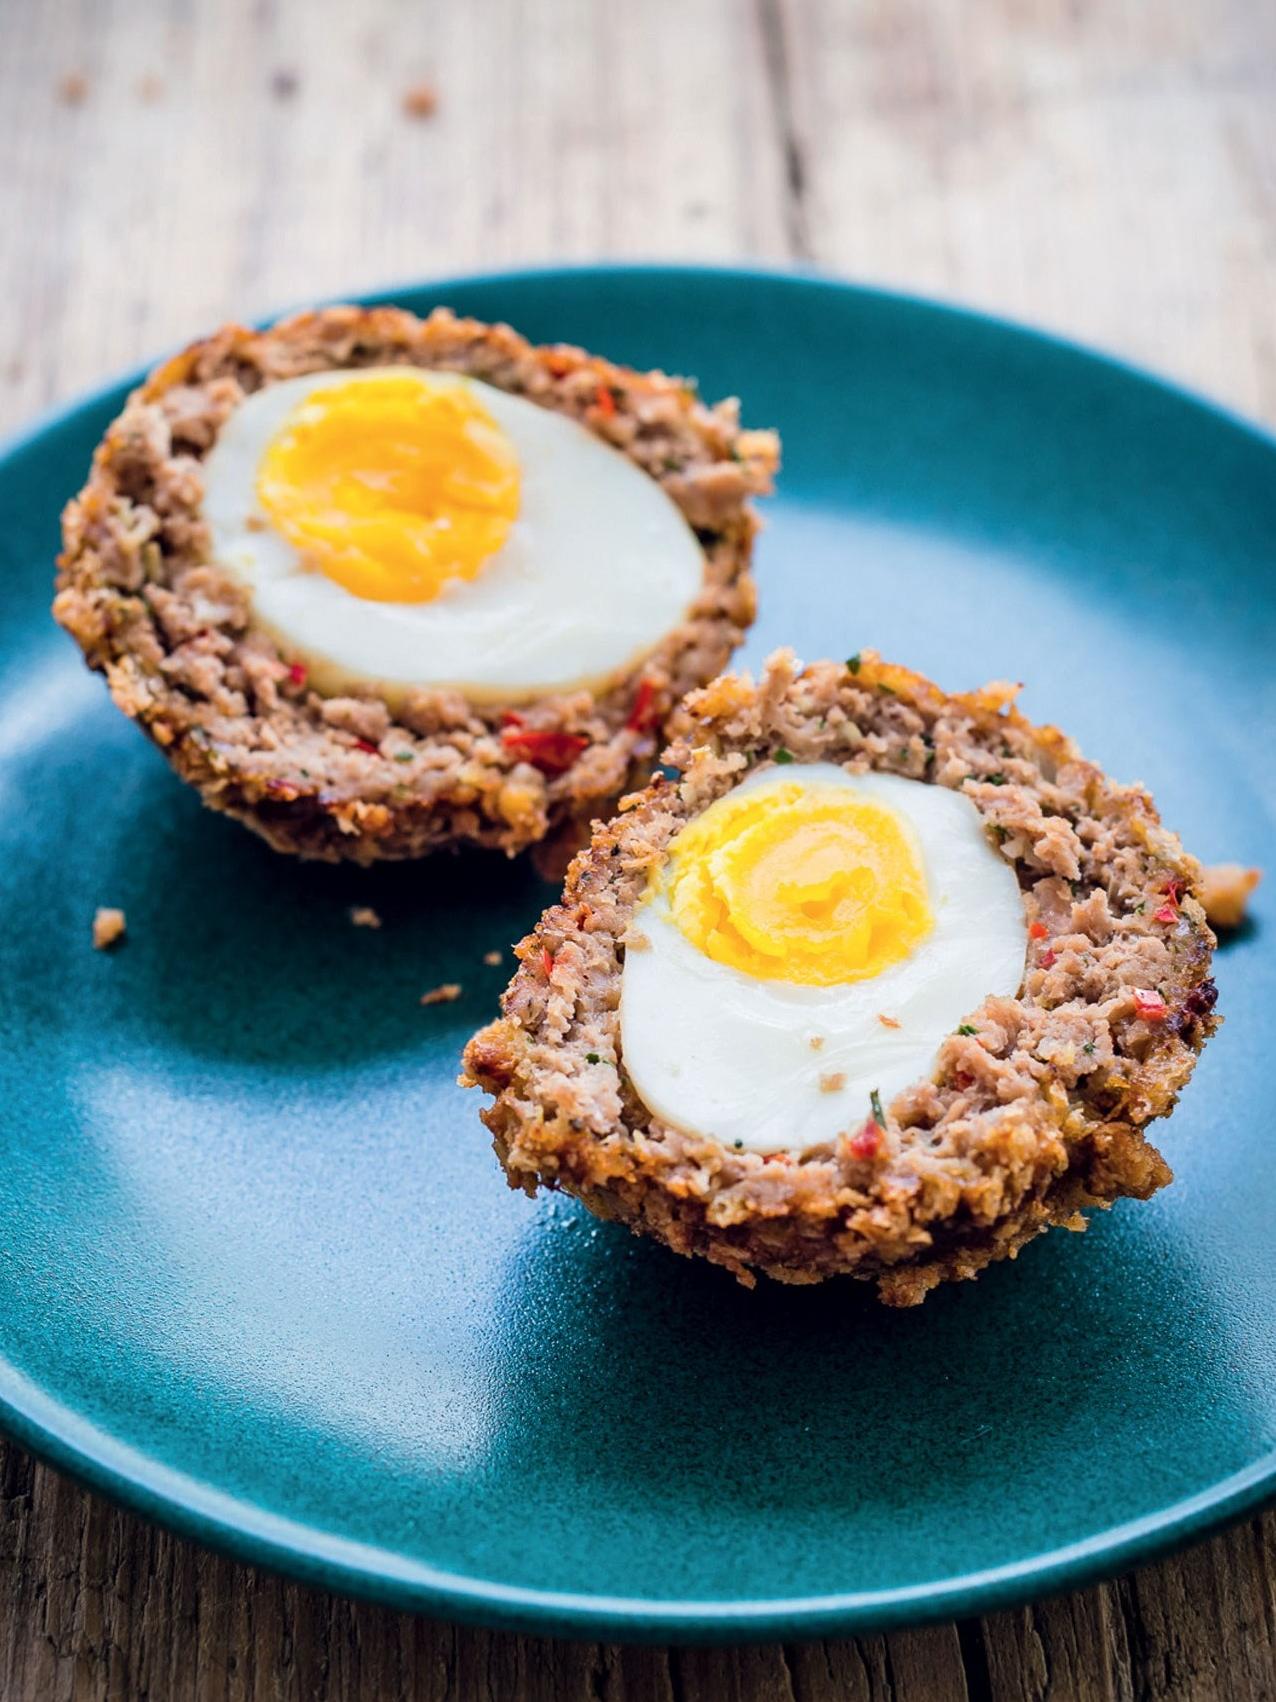  Give your taste buds a never-before experience with Spiced Scotch Eggs.